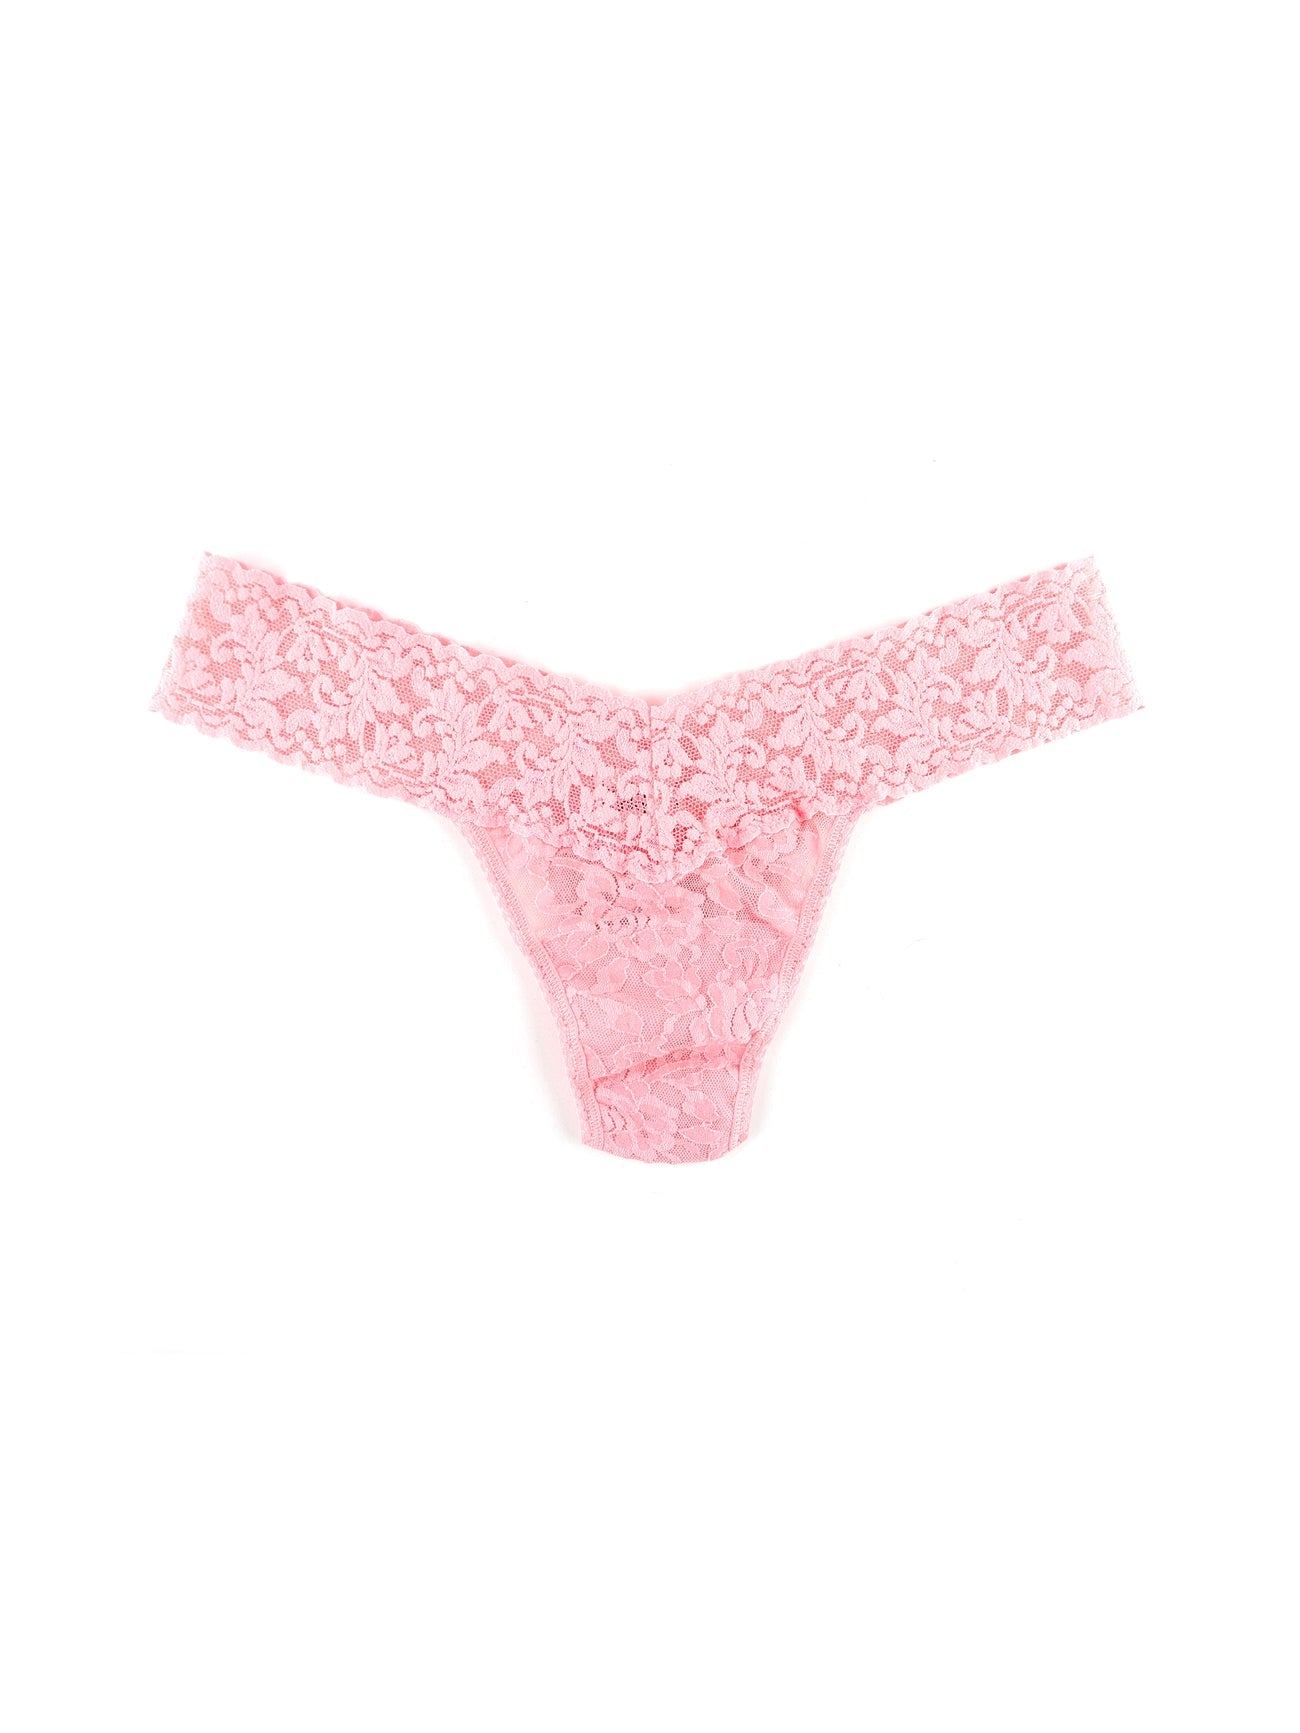 Buy pink-lemonade Hanky Panky Signature Lace Low Rise Thong - Packaged 4911p